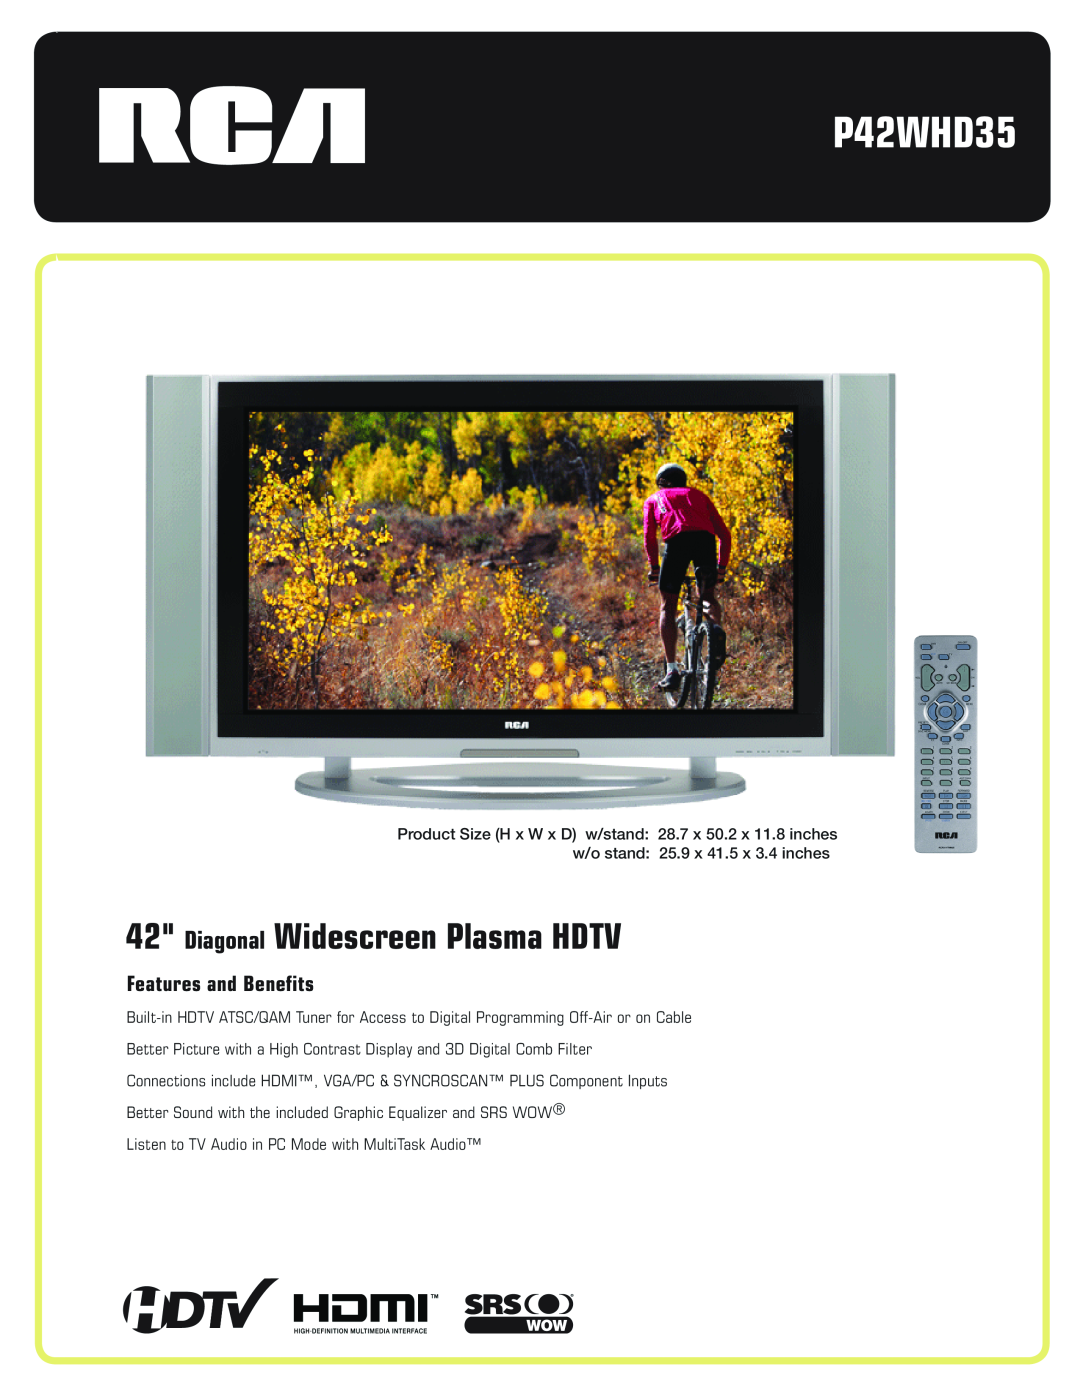 RCA P42WHD35 manual Diagonal Widescreen Plasma HDTV, Features and Benefits 